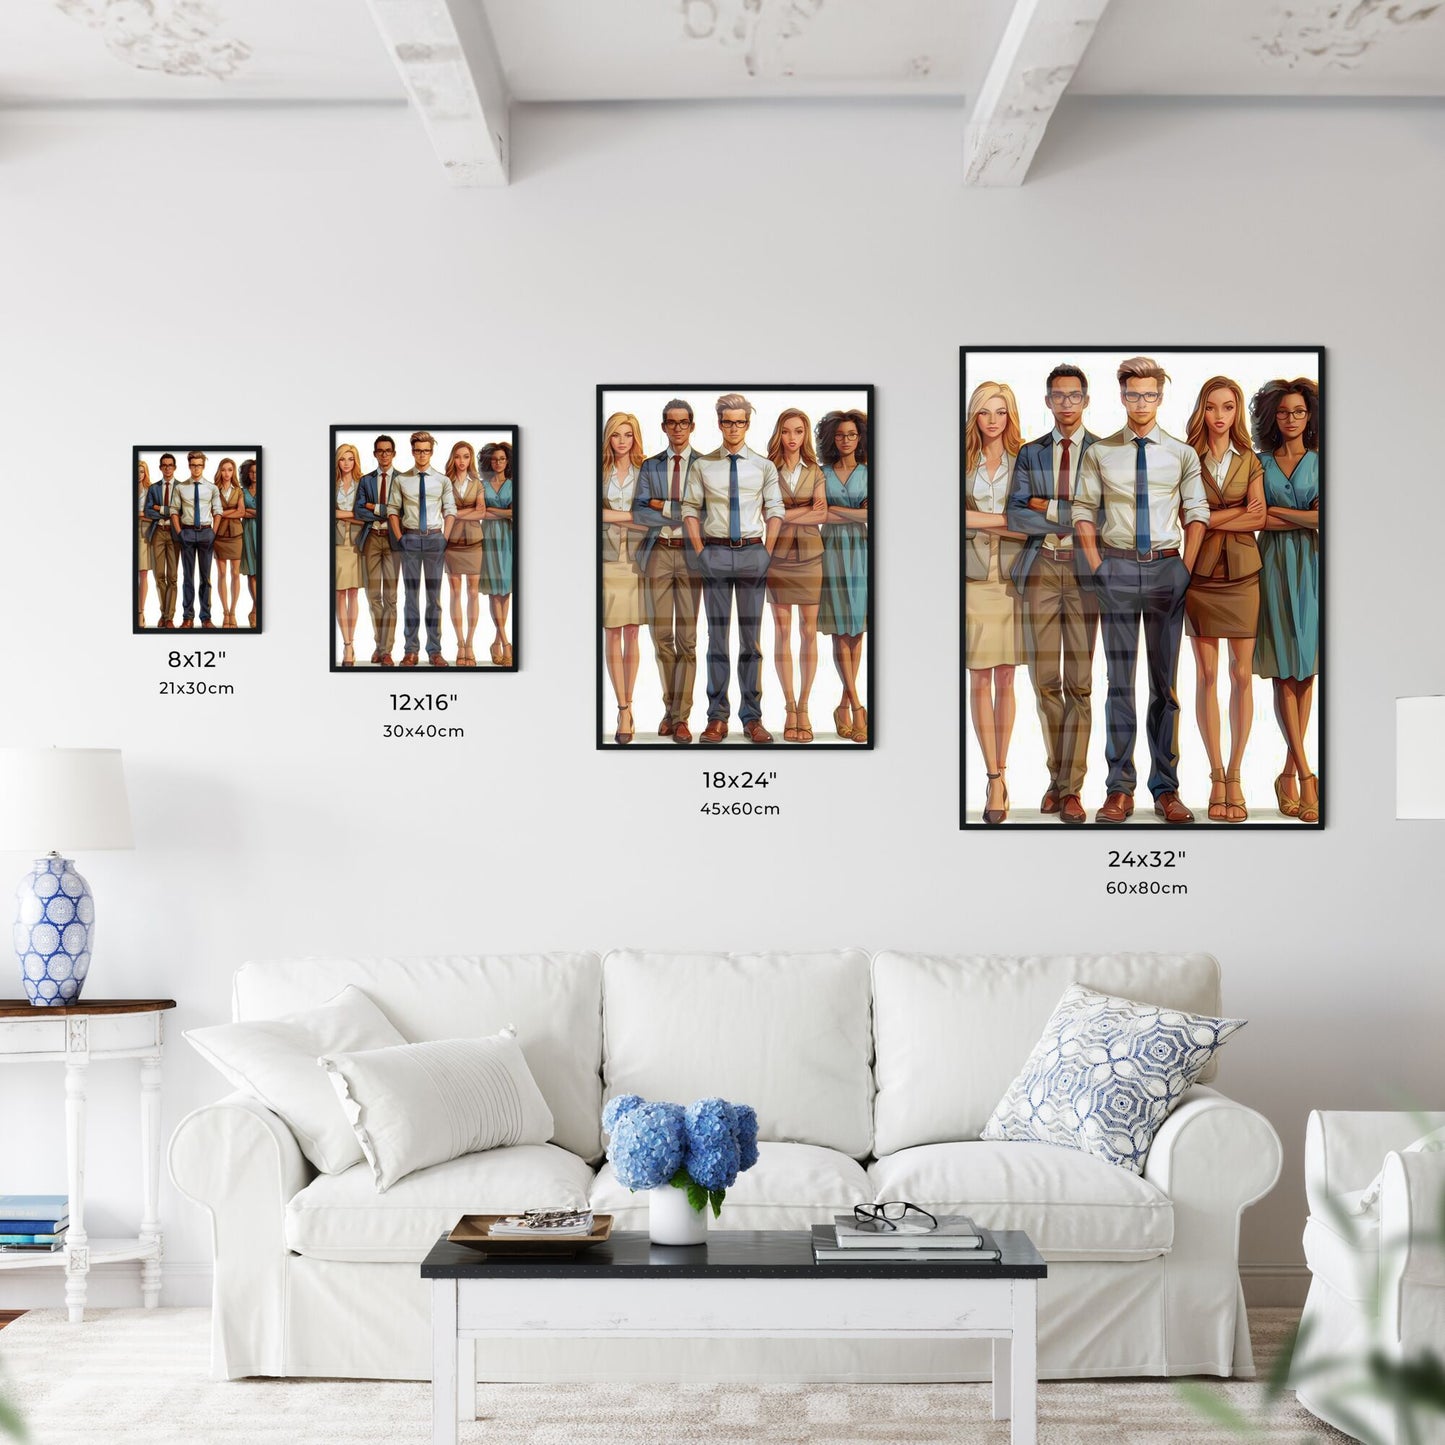 Vibrant Artistic Painting Depicting a Group of Individuals in a Workplace Setting Default Title